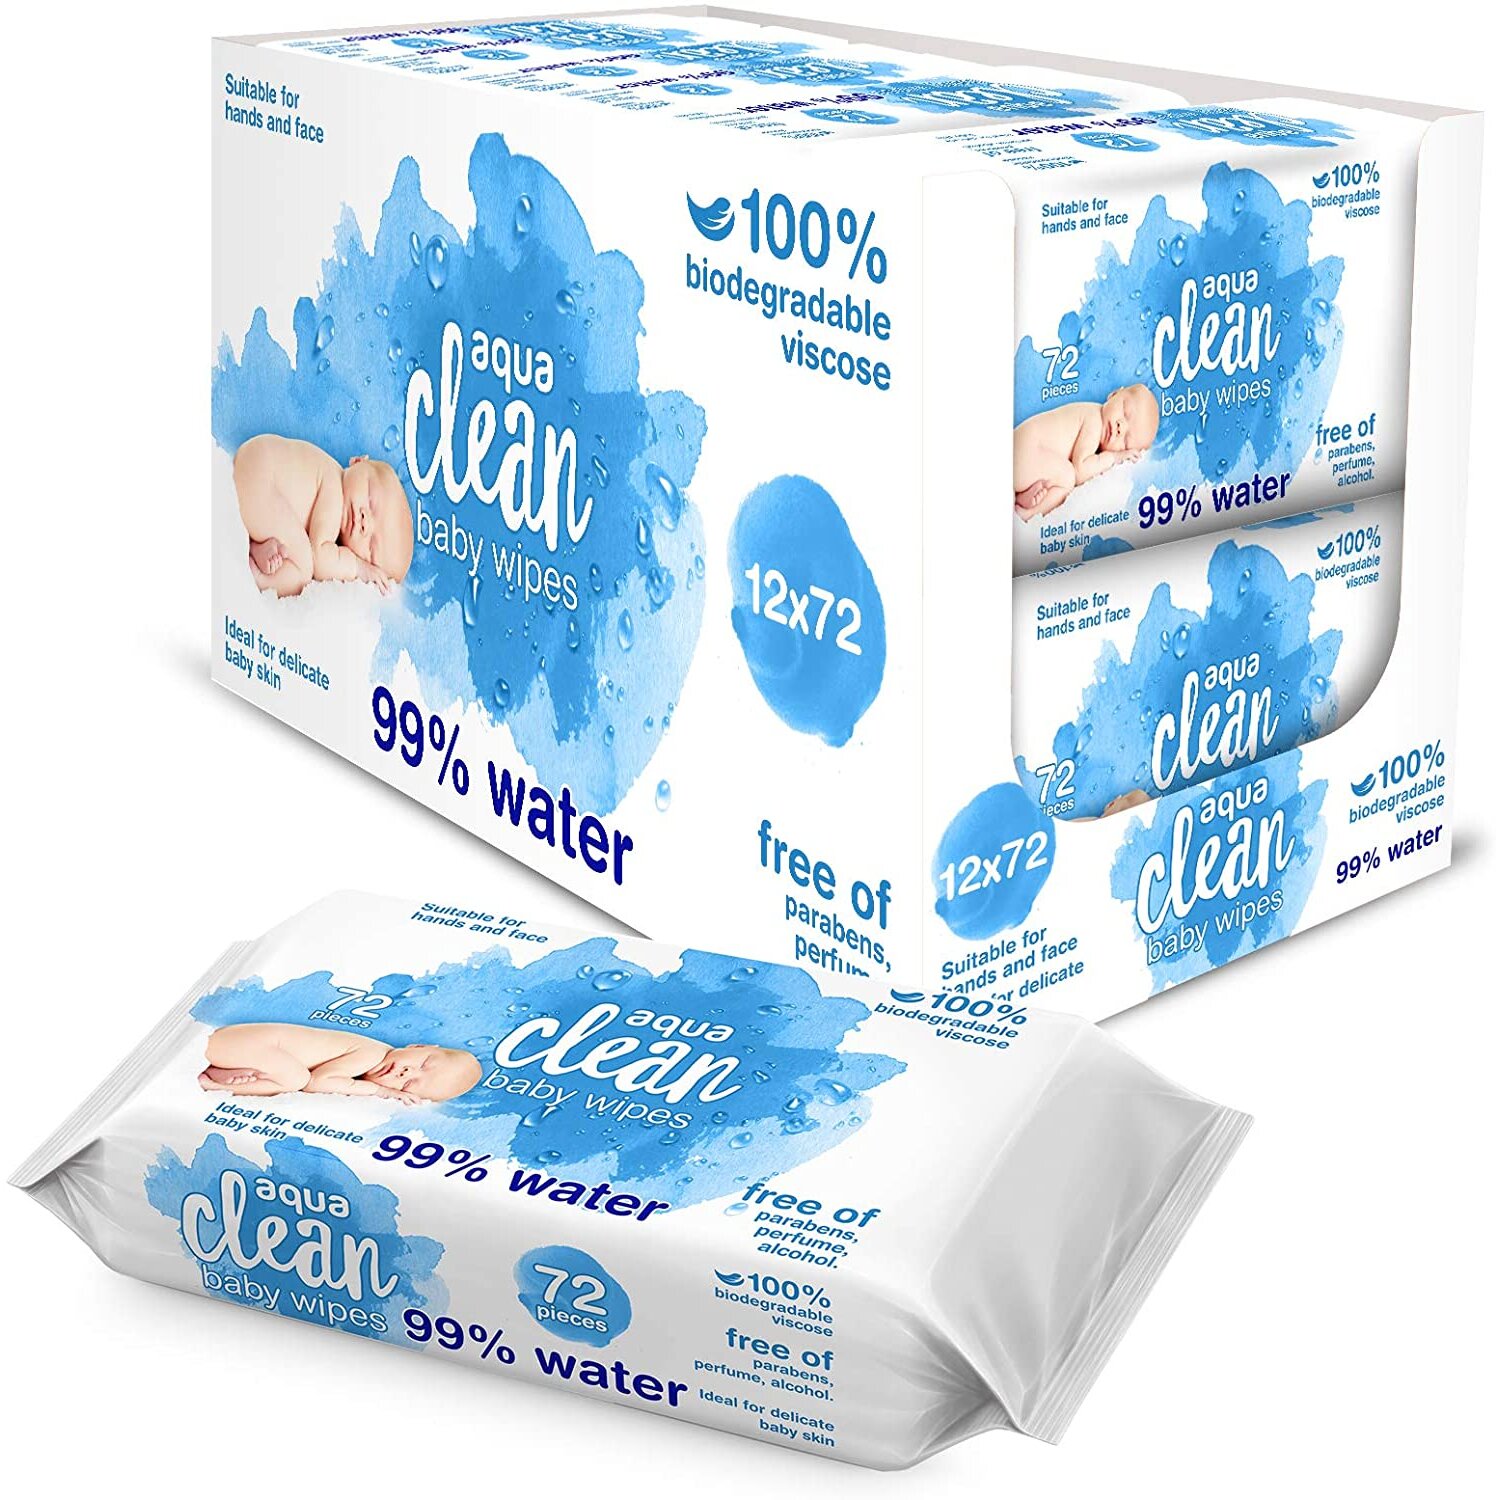 12 Pack Aqua Clean Baby Wipes (72 Wipes per Pack) 99% Purified Water 100% Biodegradable 100% Plastic Free (72 x 12 Wipes)